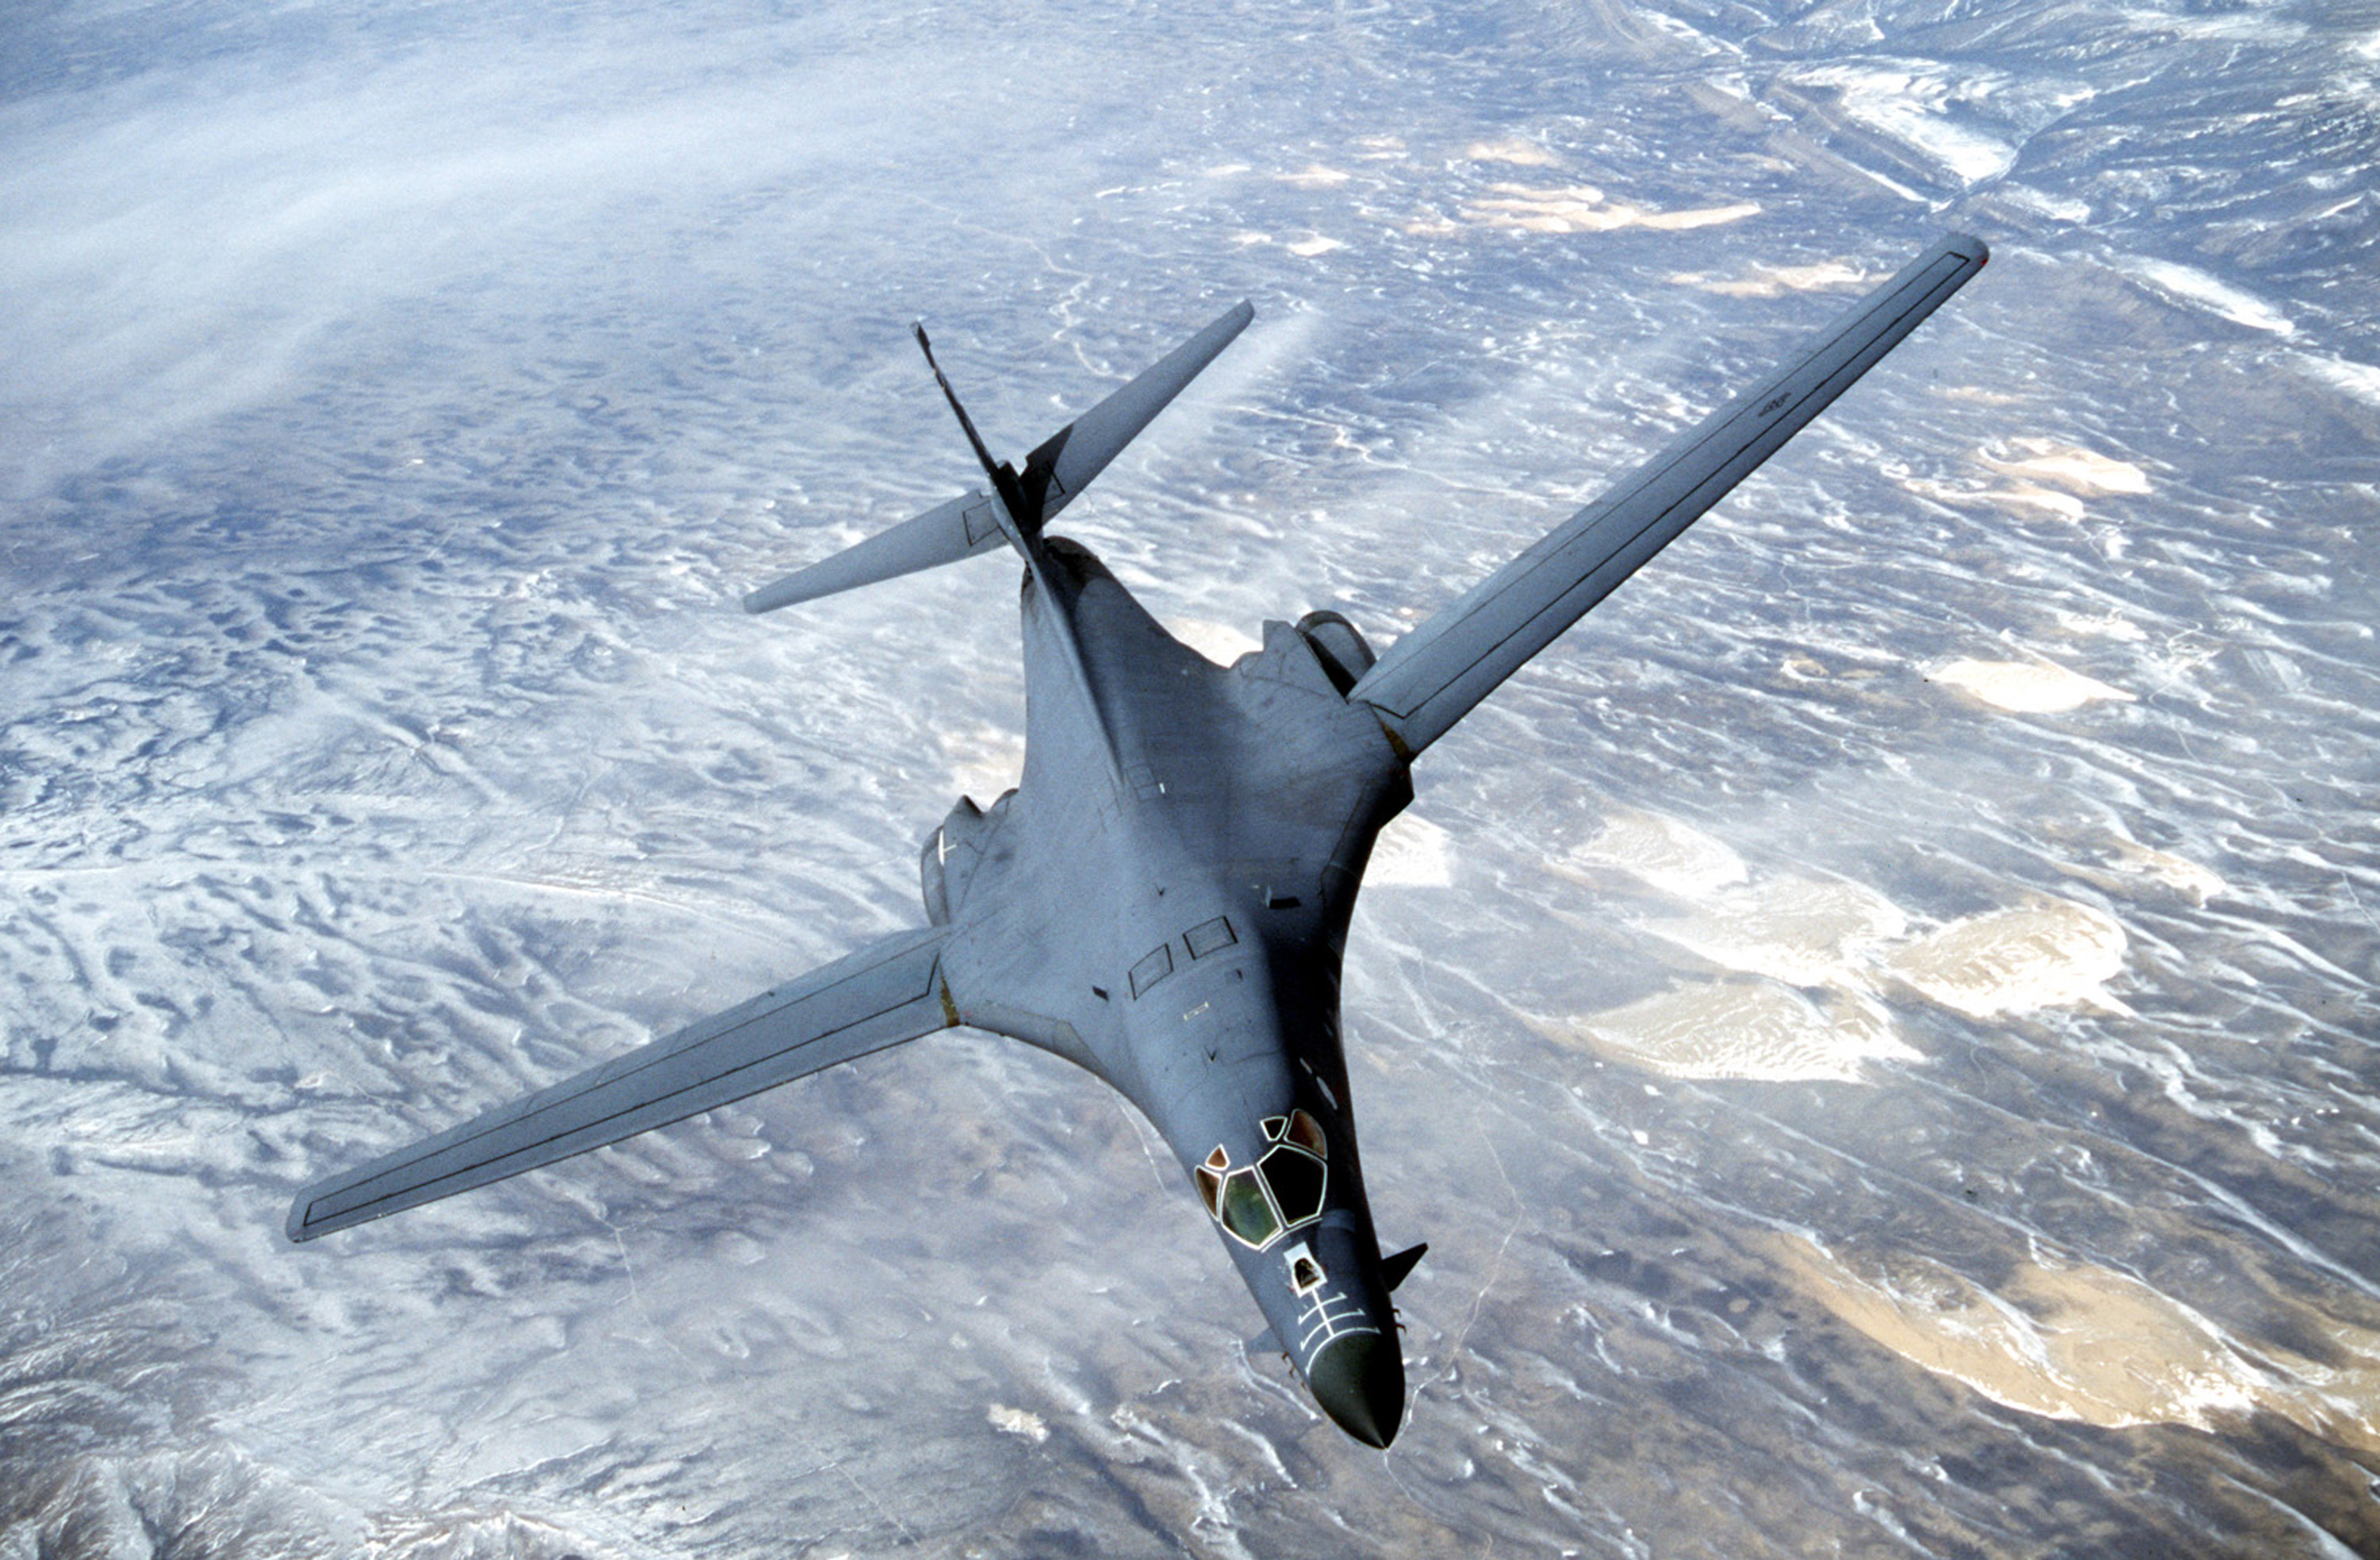 A B-1 bomber over Afghanistan. (Air Force / Getty Images)